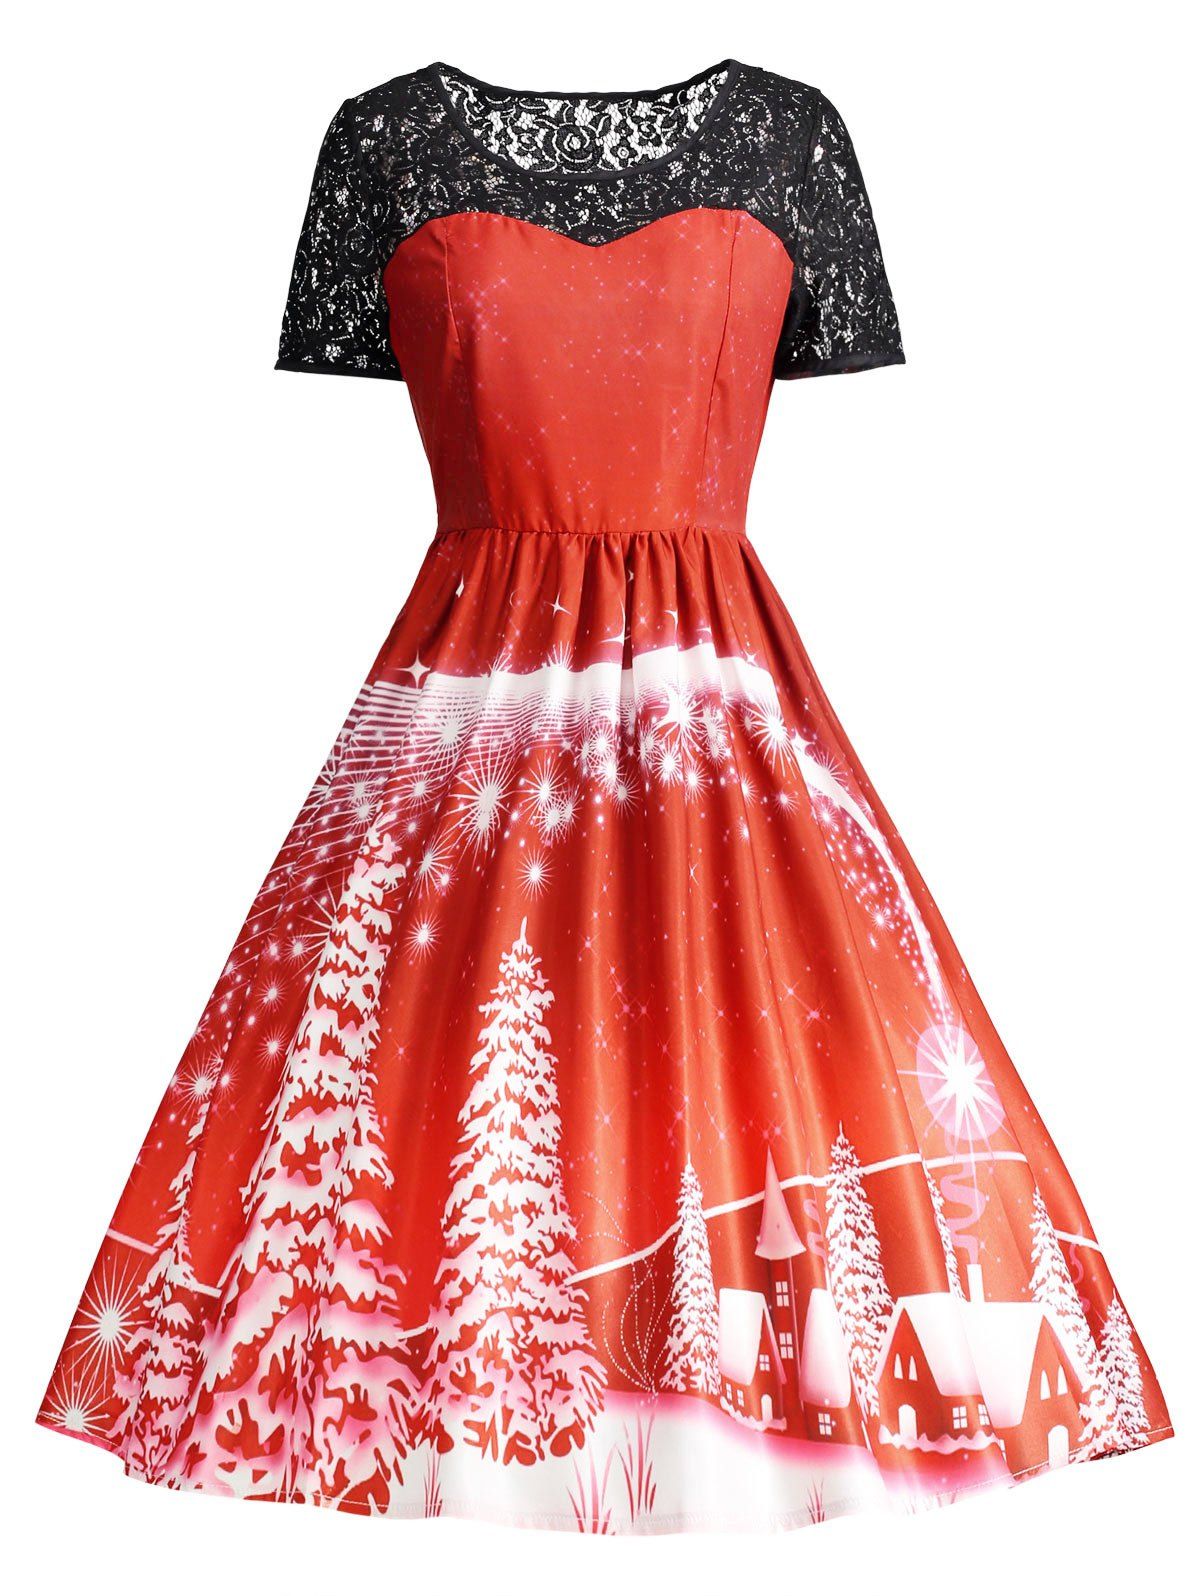 Print Lace Panel Vintage Party Dress - RED XL